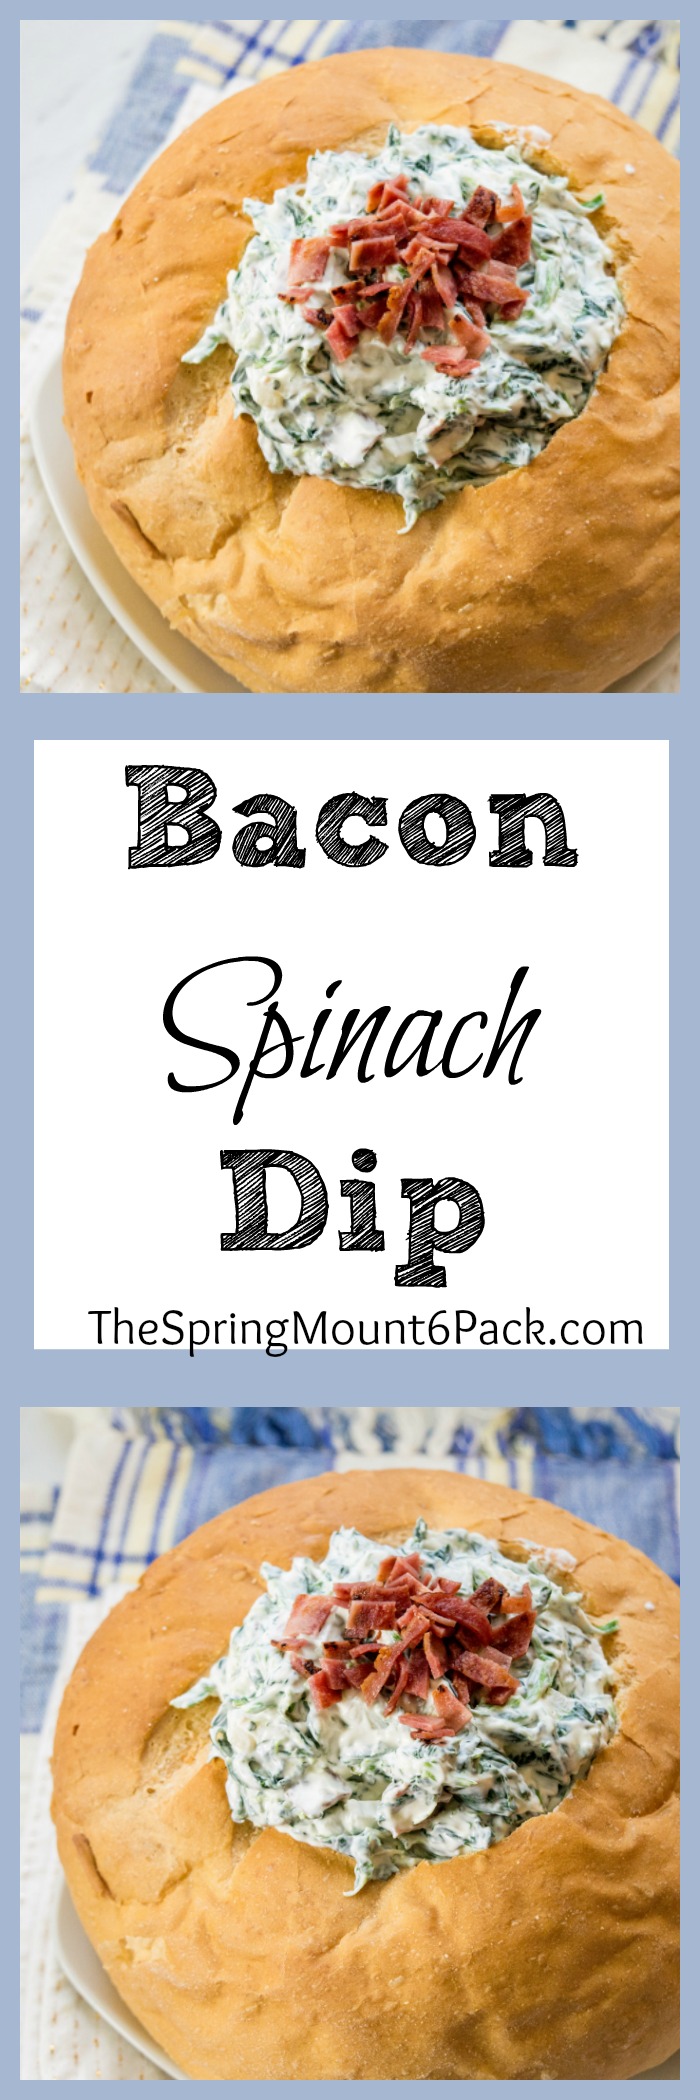 Love spinach dip? So do I. This spinach dip recipe, an easy pot luck recipe, will leave you craving more once you add my special ingredient. 